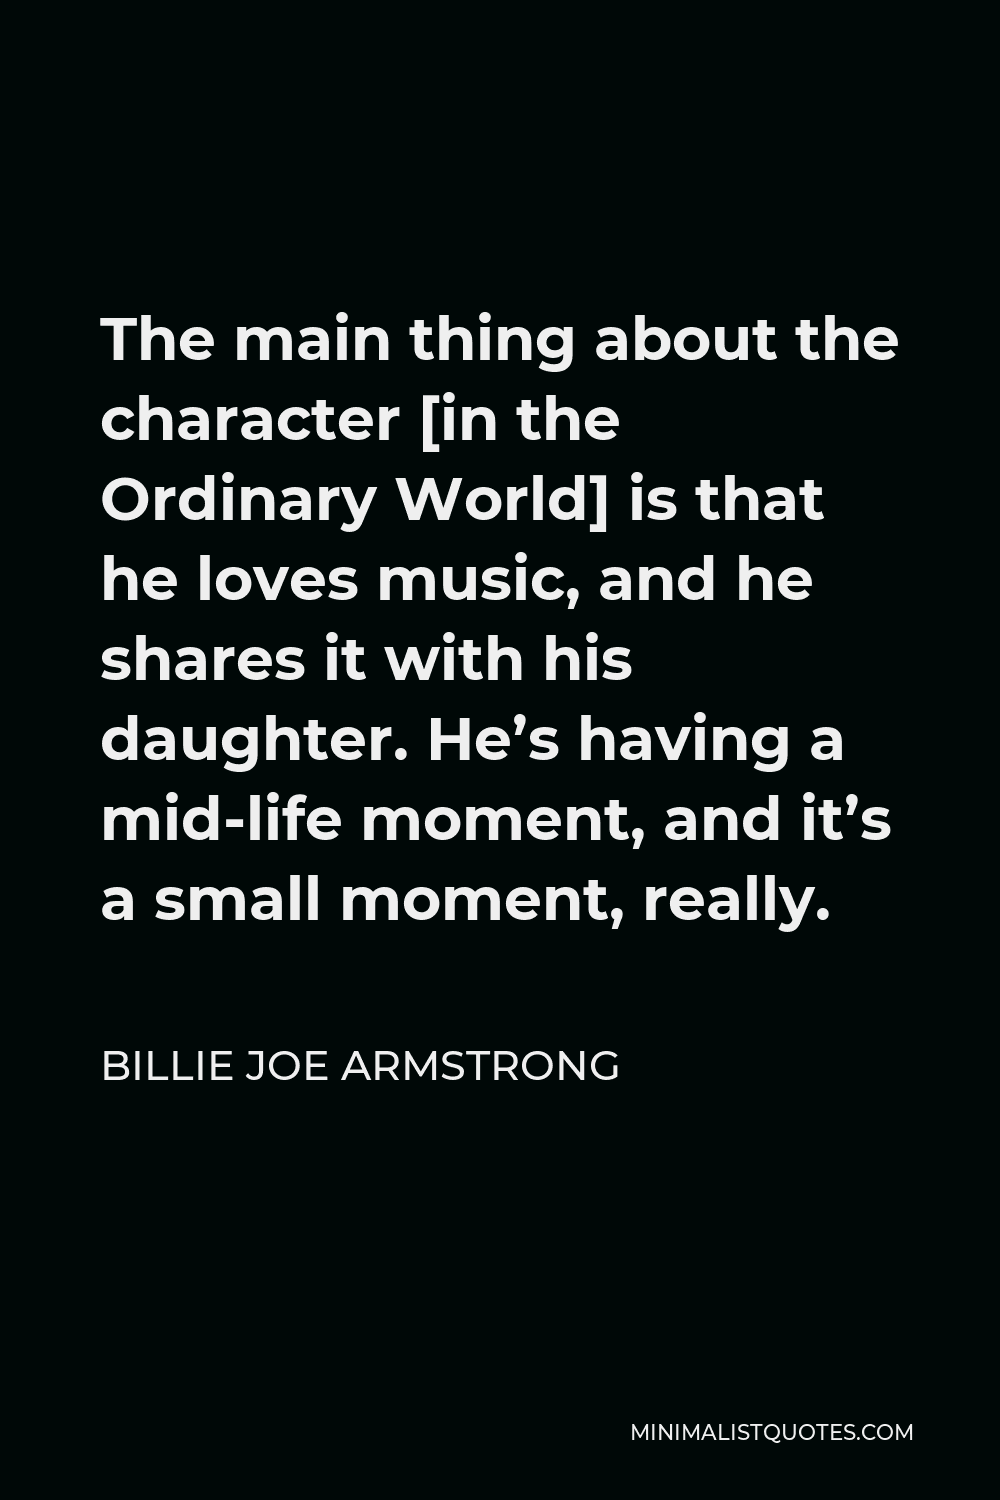 Billie Joe Armstrong Quote - The main thing about the character [in the Ordinary World] is that he loves music, and he shares it with his daughter. He’s having a mid-life moment, and it’s a small moment, really.